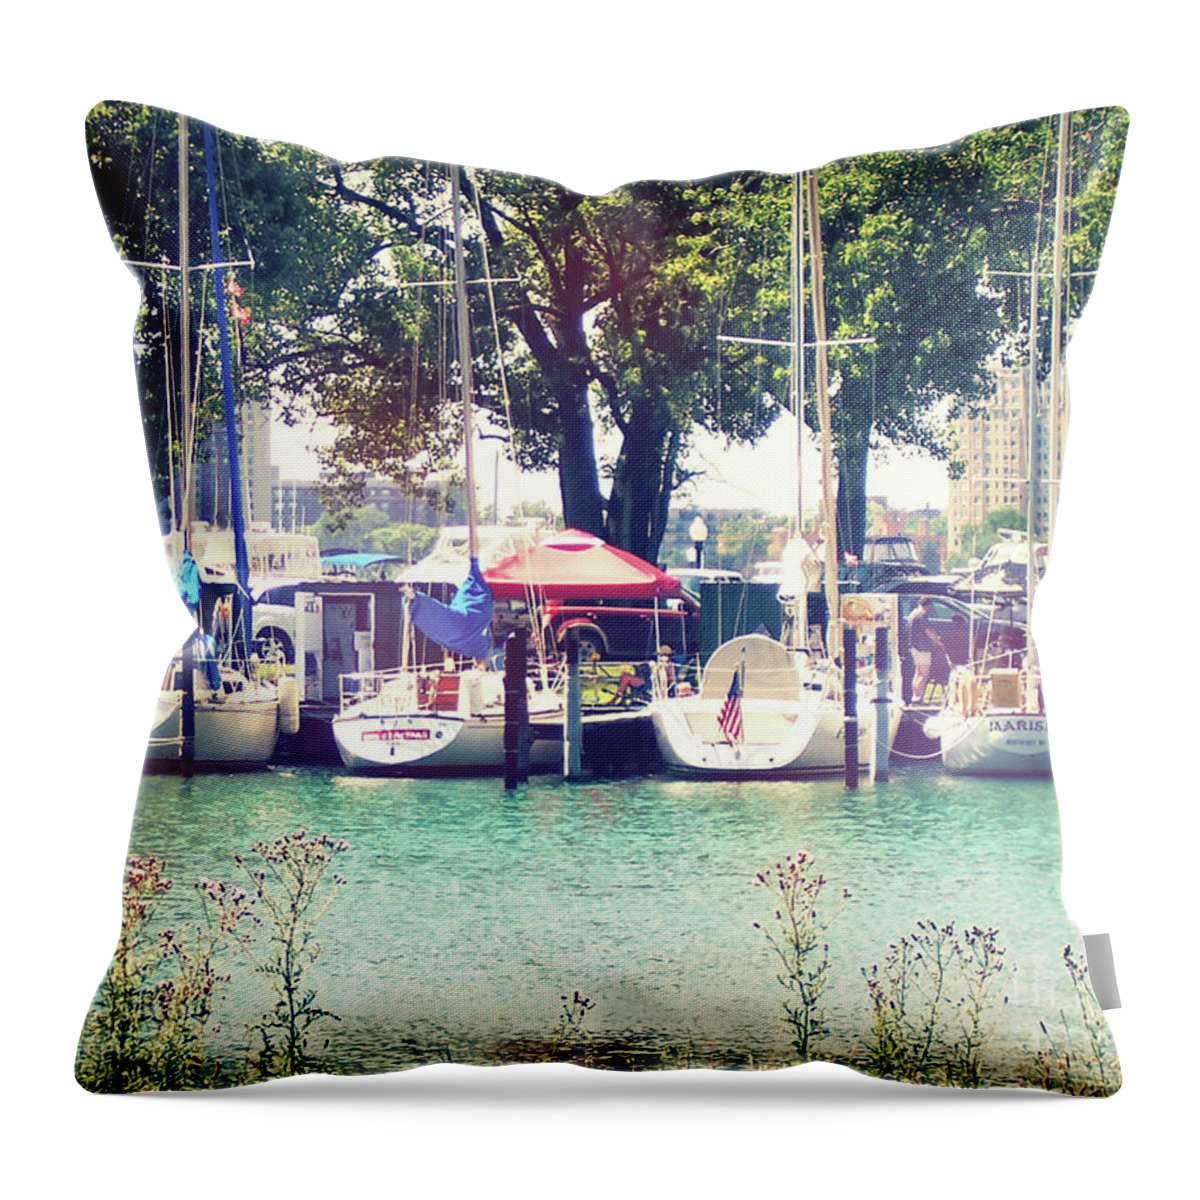 Detroit Yacht Club Throw Pillow featuring the photograph Detroit Yacht Club by Phil Perkins